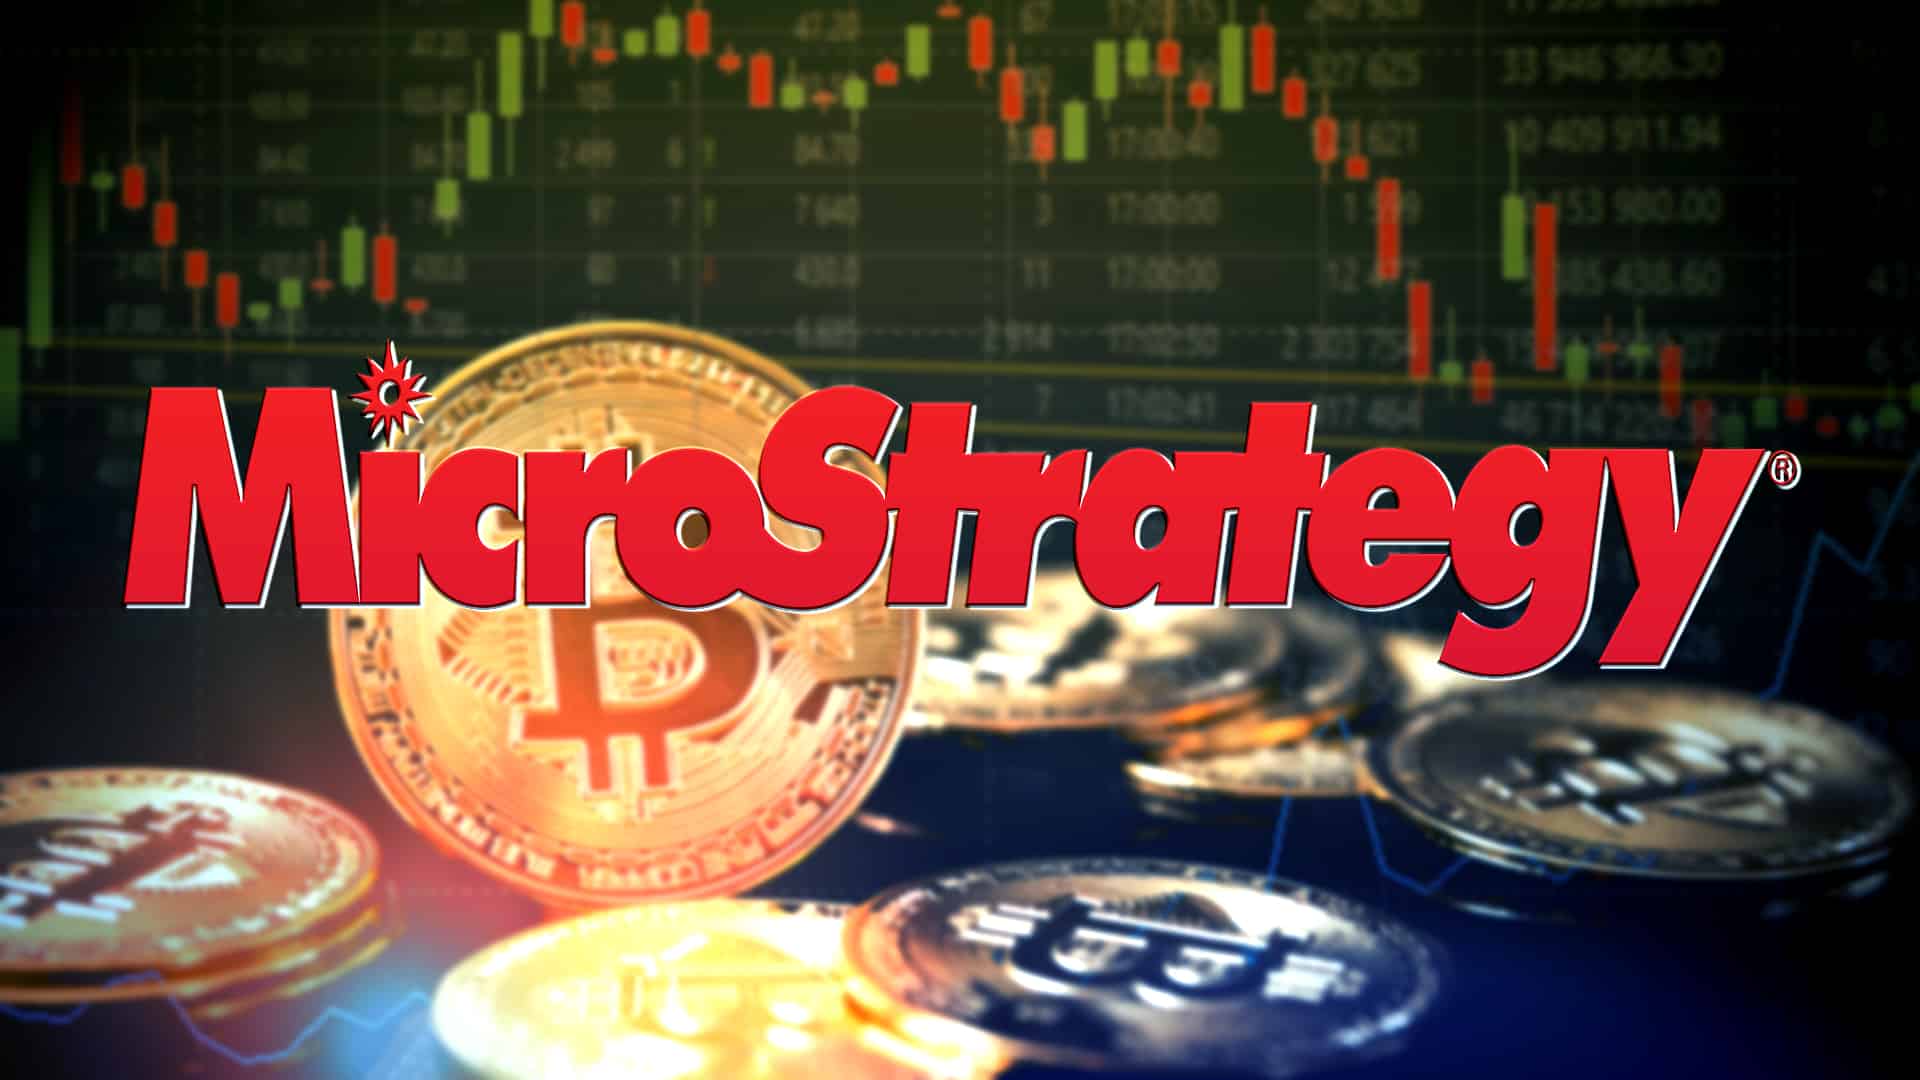 The Bitcoin Effect of MicroStrategy: Why Midcap and Non-Profit Companies Are Converting Their Treasury to Bitcoin